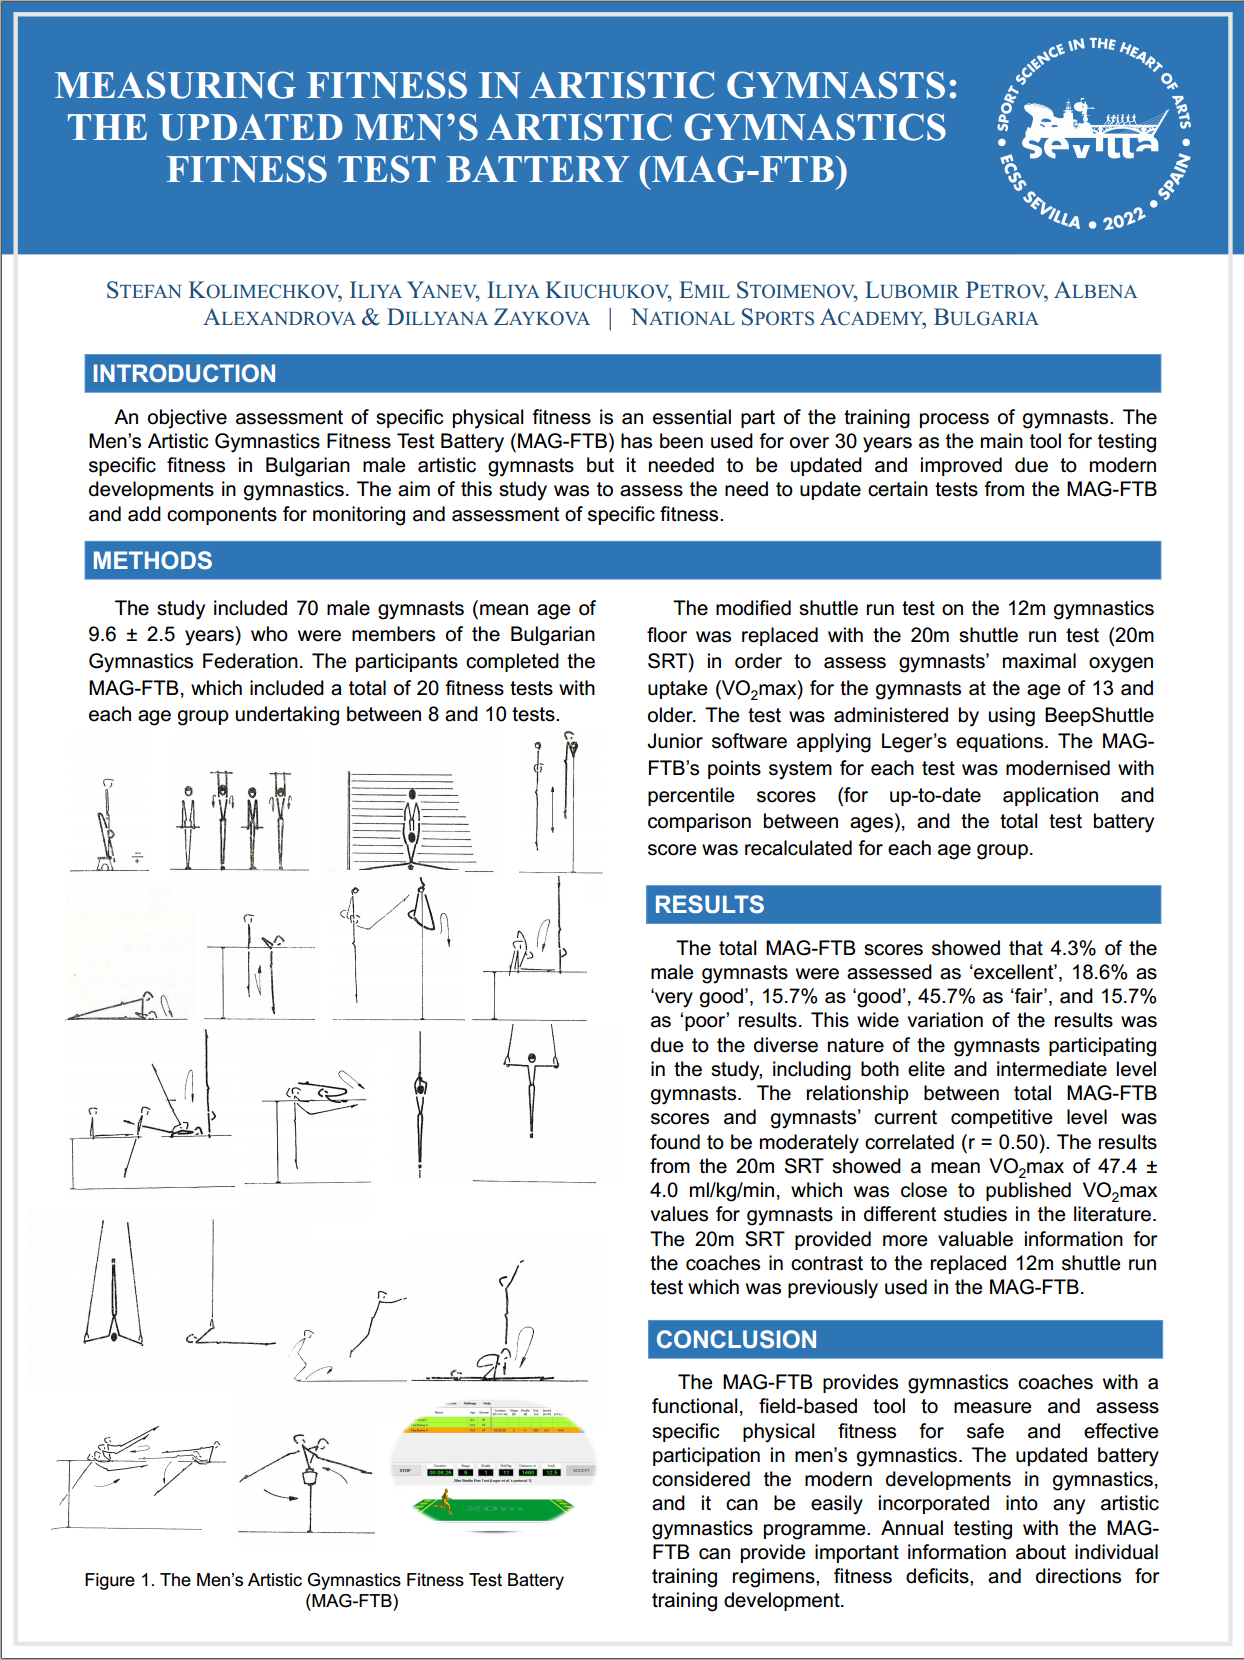 Measuring fitness in artistic gymnasts: the updated men’s artistic gymnastics fitness test battery (MAG-FTB) at the ECSS Congress in Seville 2022